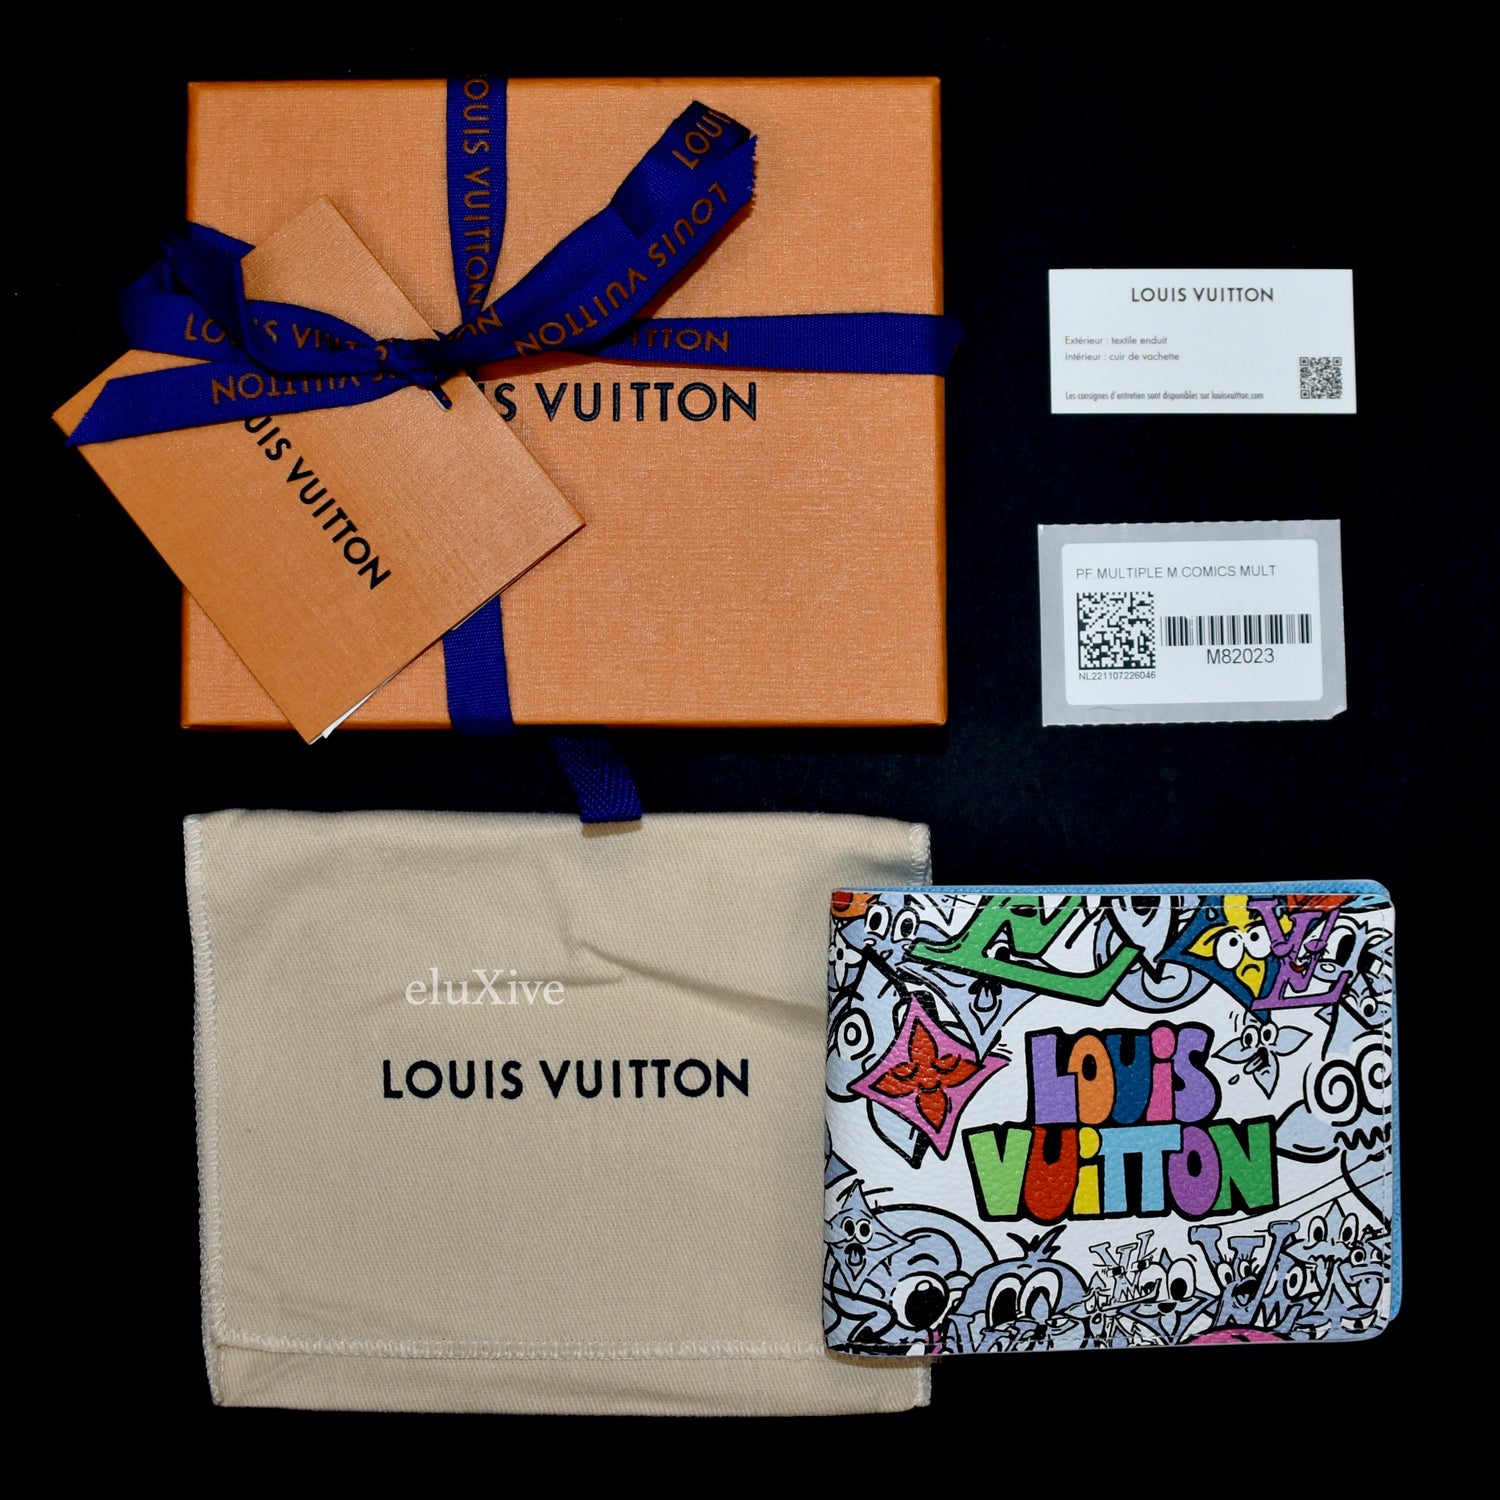 LV holiday packaging 2019